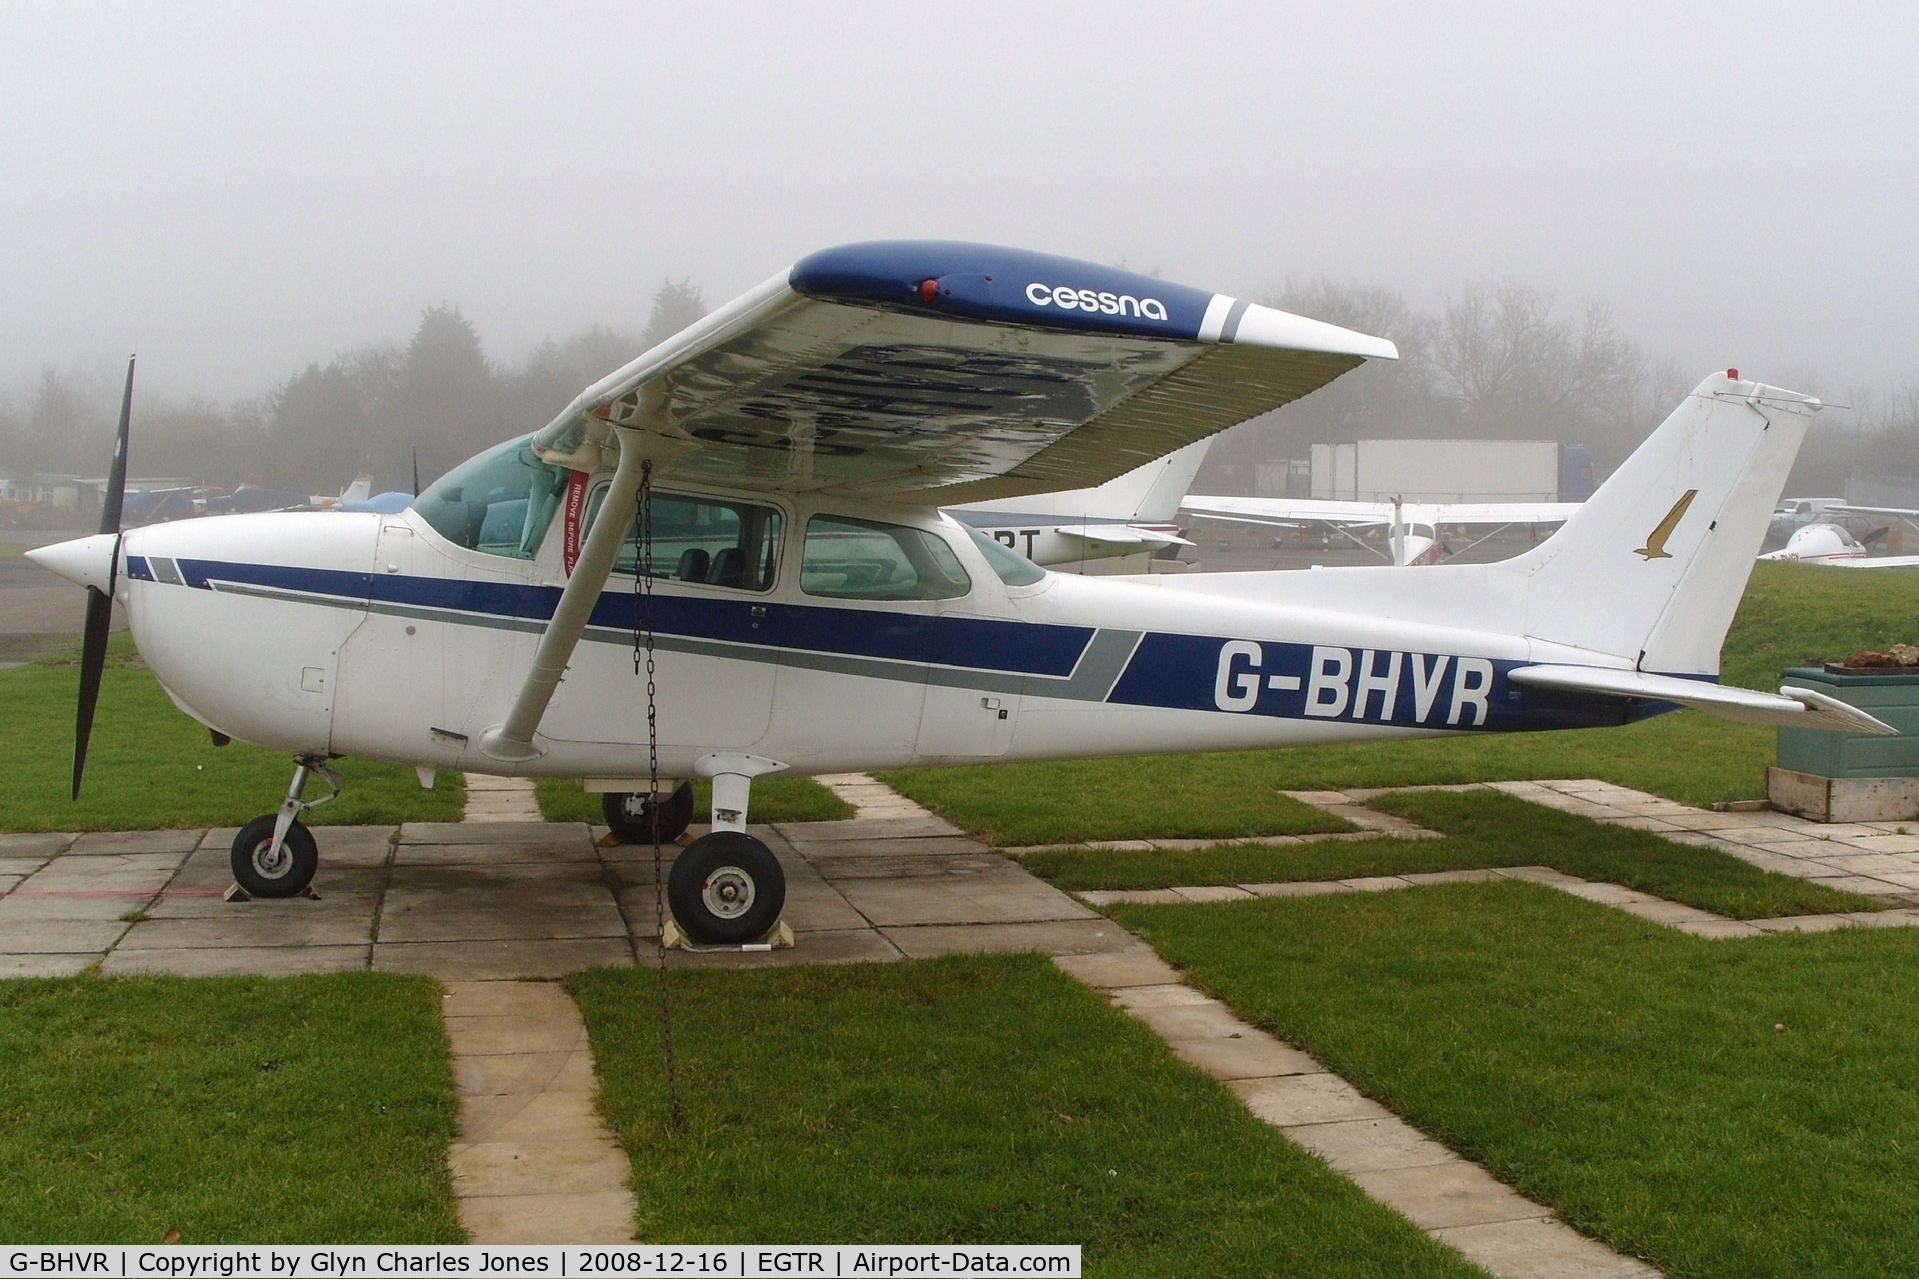 G-BHVR, 1978 Cessna 172N Skyhawk C/N 172-70196, Taken on a quiet cold and foggy day. With thanks to Elstree control tower who granted me authority to take photographs on the aerodrome. Previously N738SG. Owned by Victor Romeo Group.